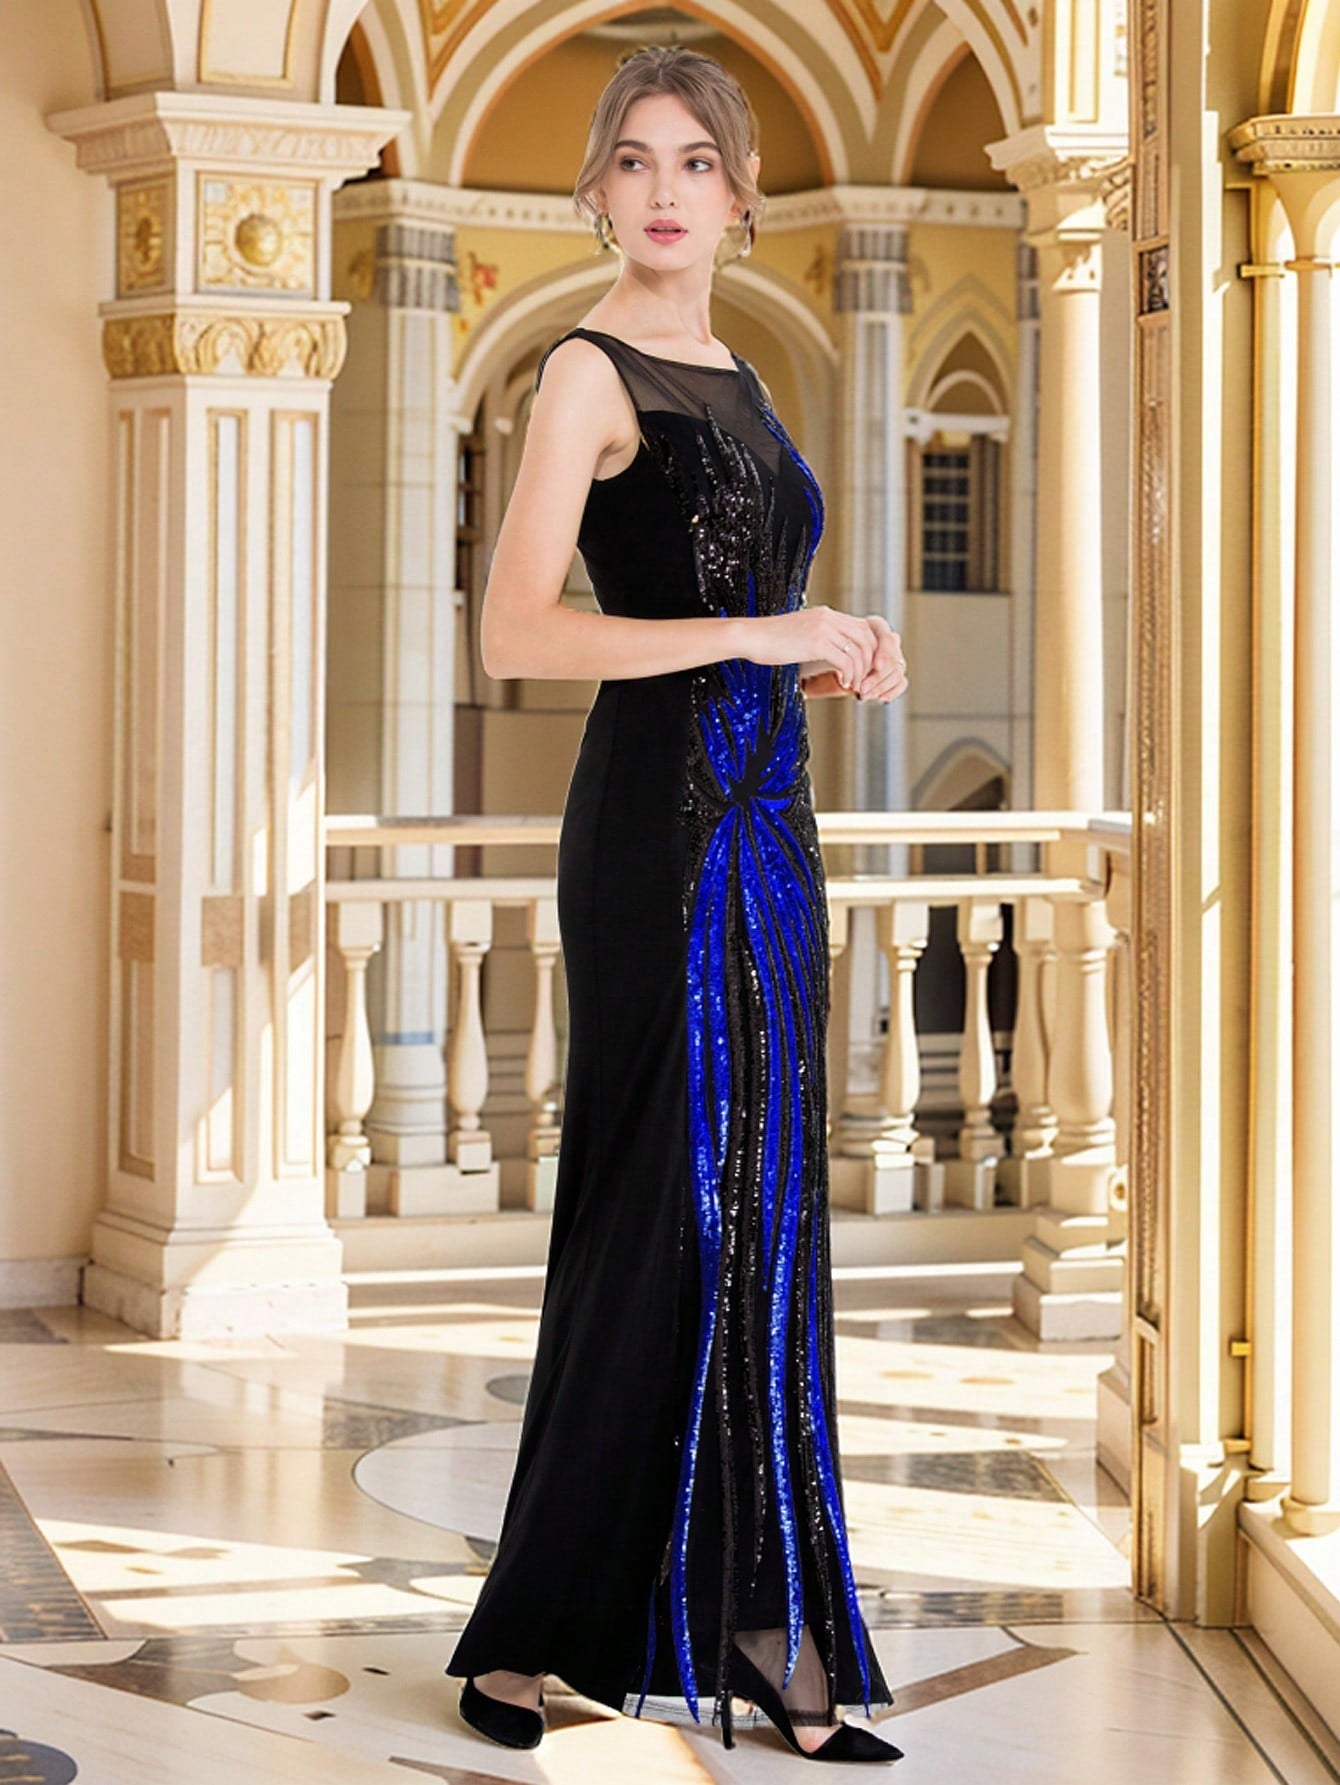 ANGEL FASHIONS Long Sheer Black Dress With Round Neckline, Blue Sequin Detailing For Evening